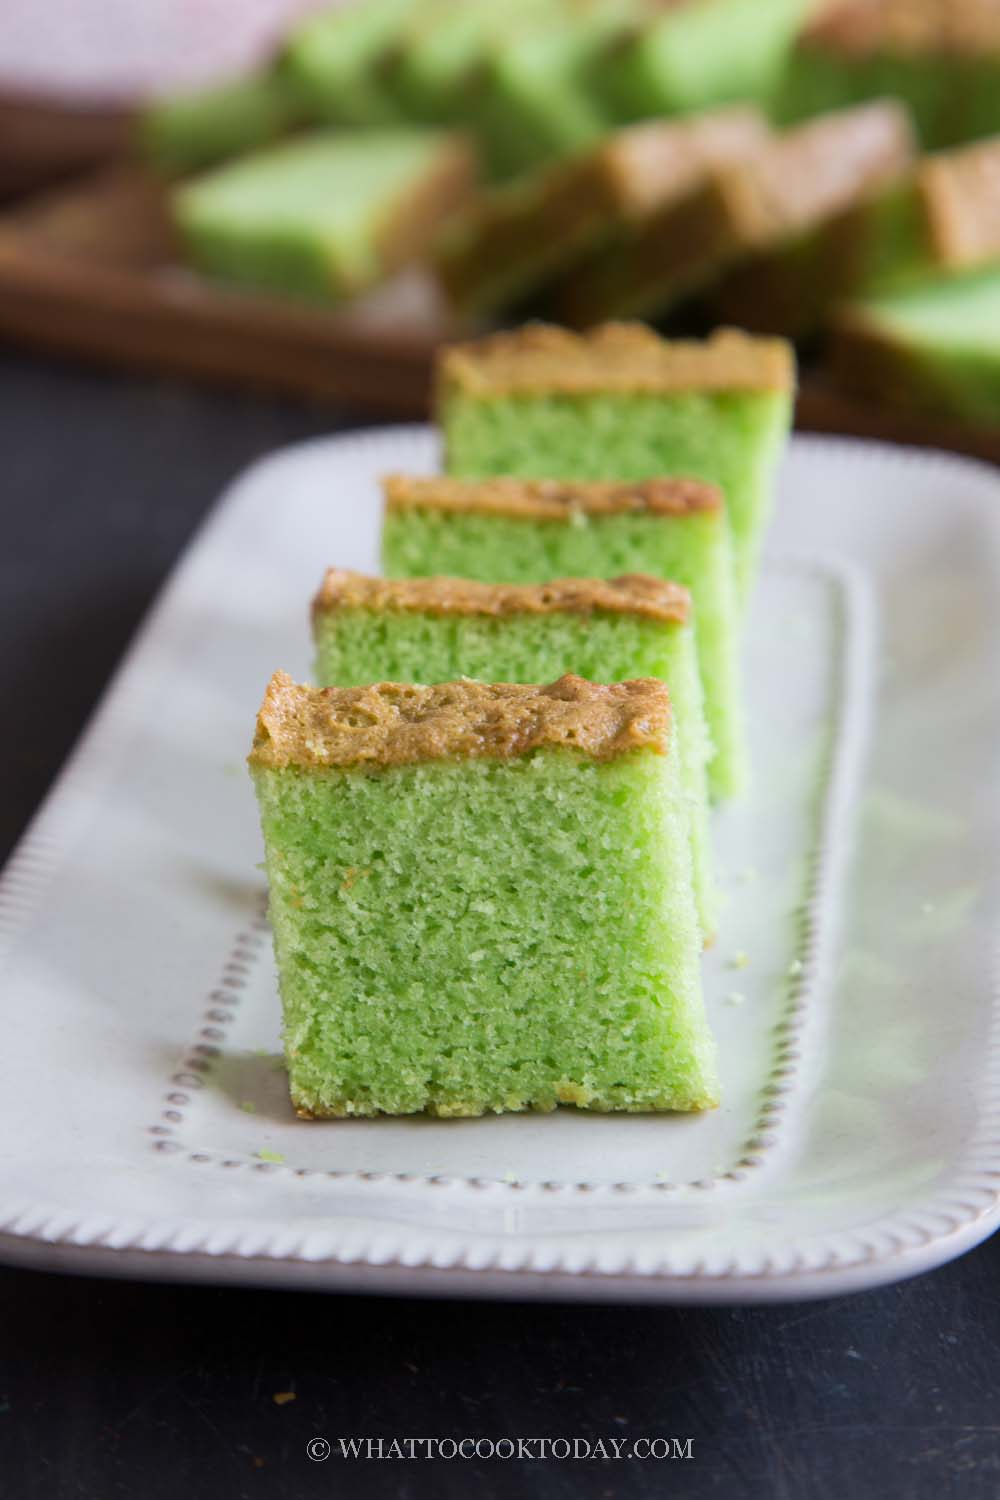 Pandan Layer Cake: A Step-By-Step Guide To Baking This Perfectly  Symmetrical Cake - Singapore Foodie